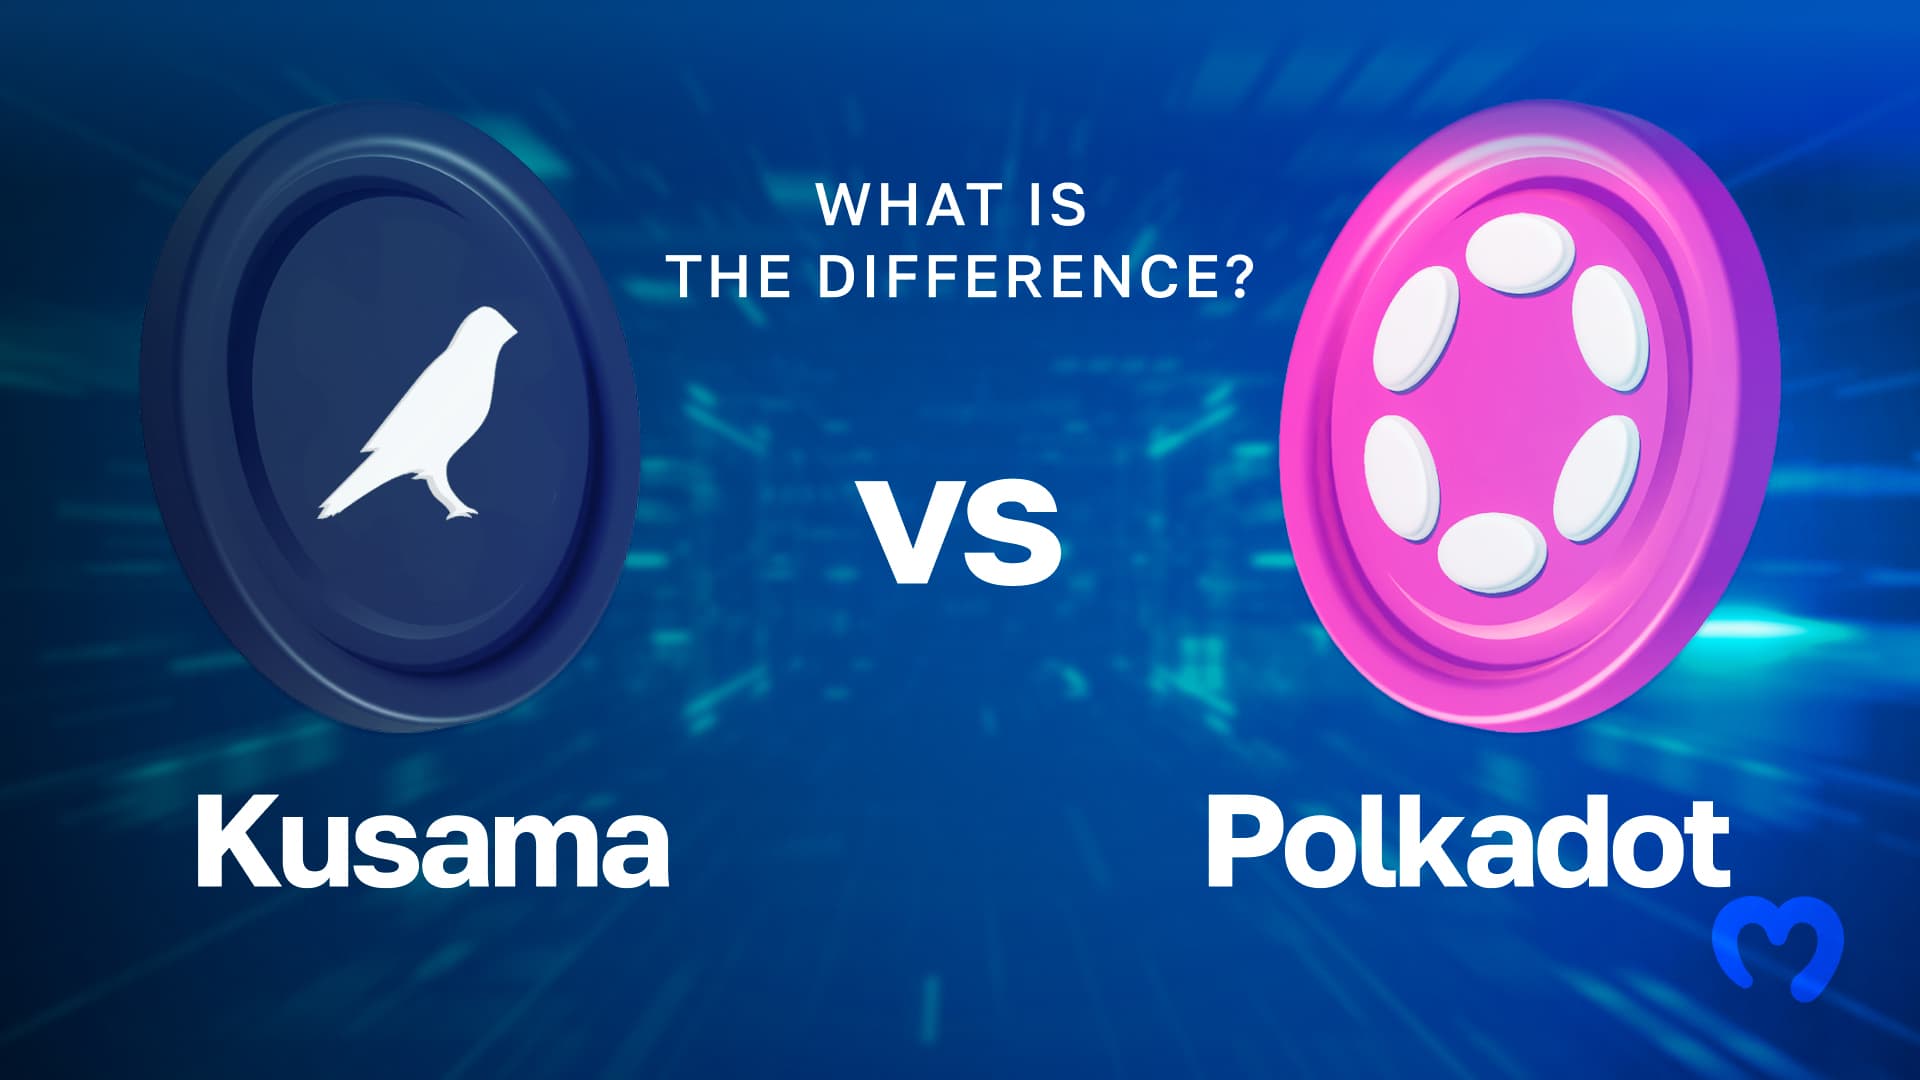 Polkadot-vs-Kusama-What-is-the-difference